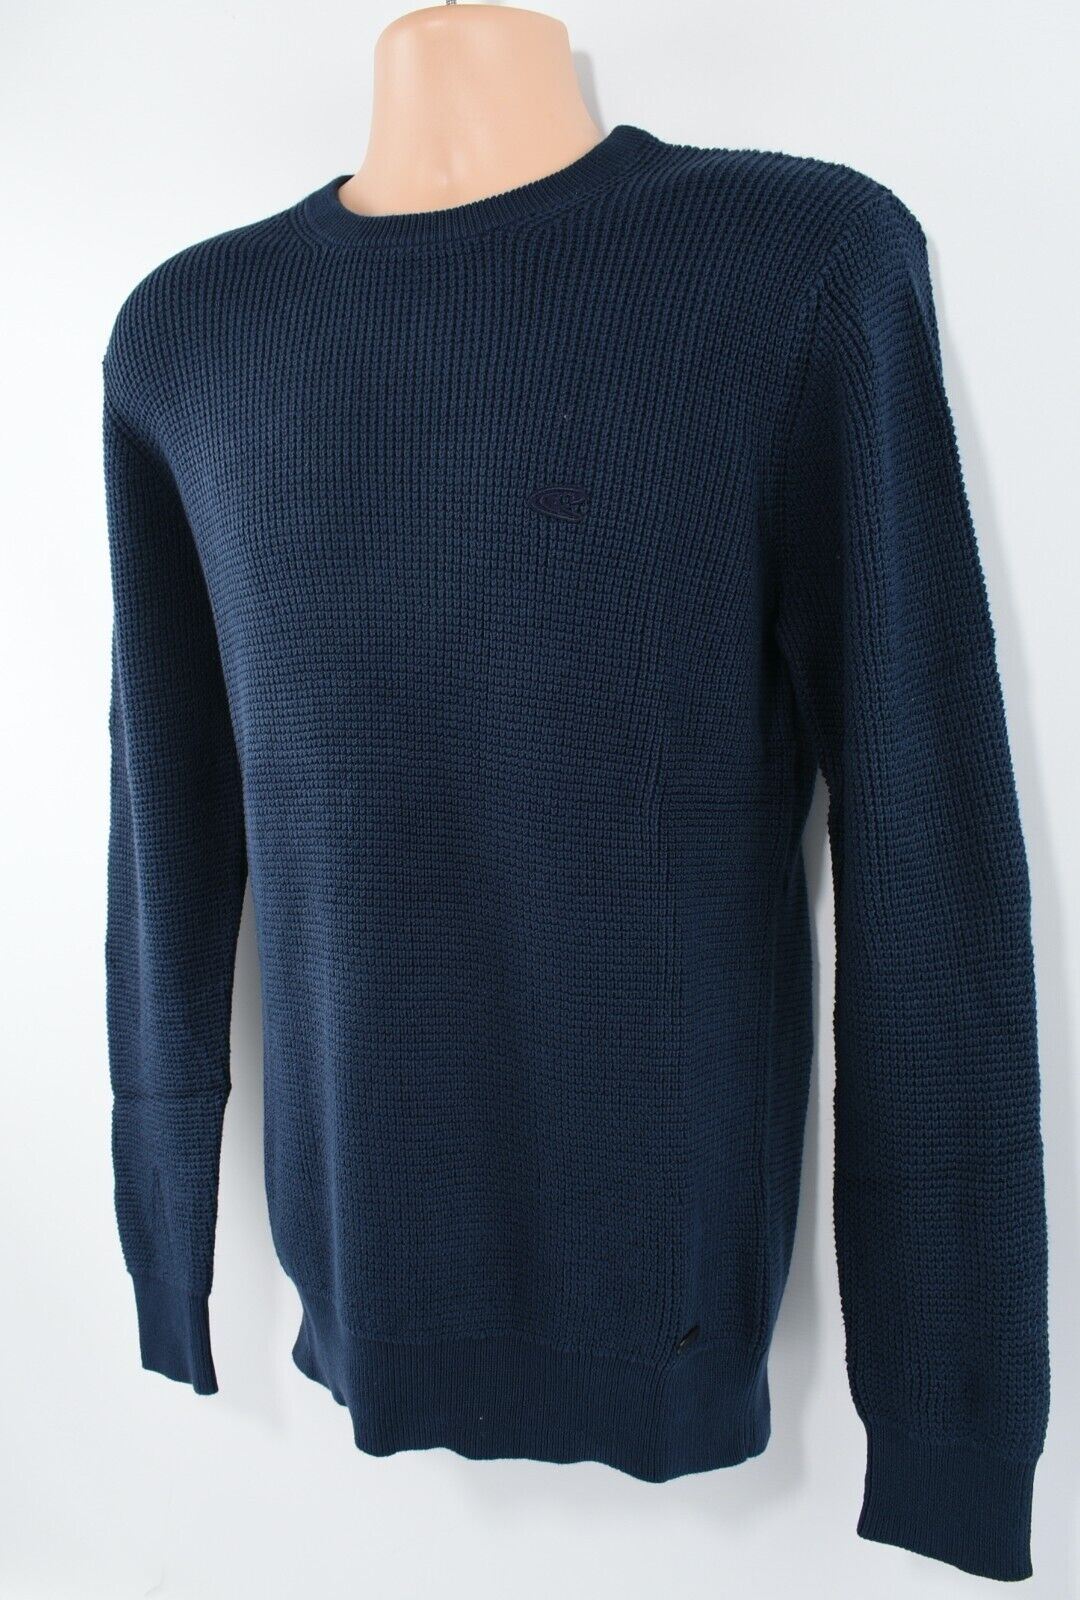 O'NEILL Men's TUCK Pullover Jumper, 100% Cotton Knit, Ink Blue, size SMALL